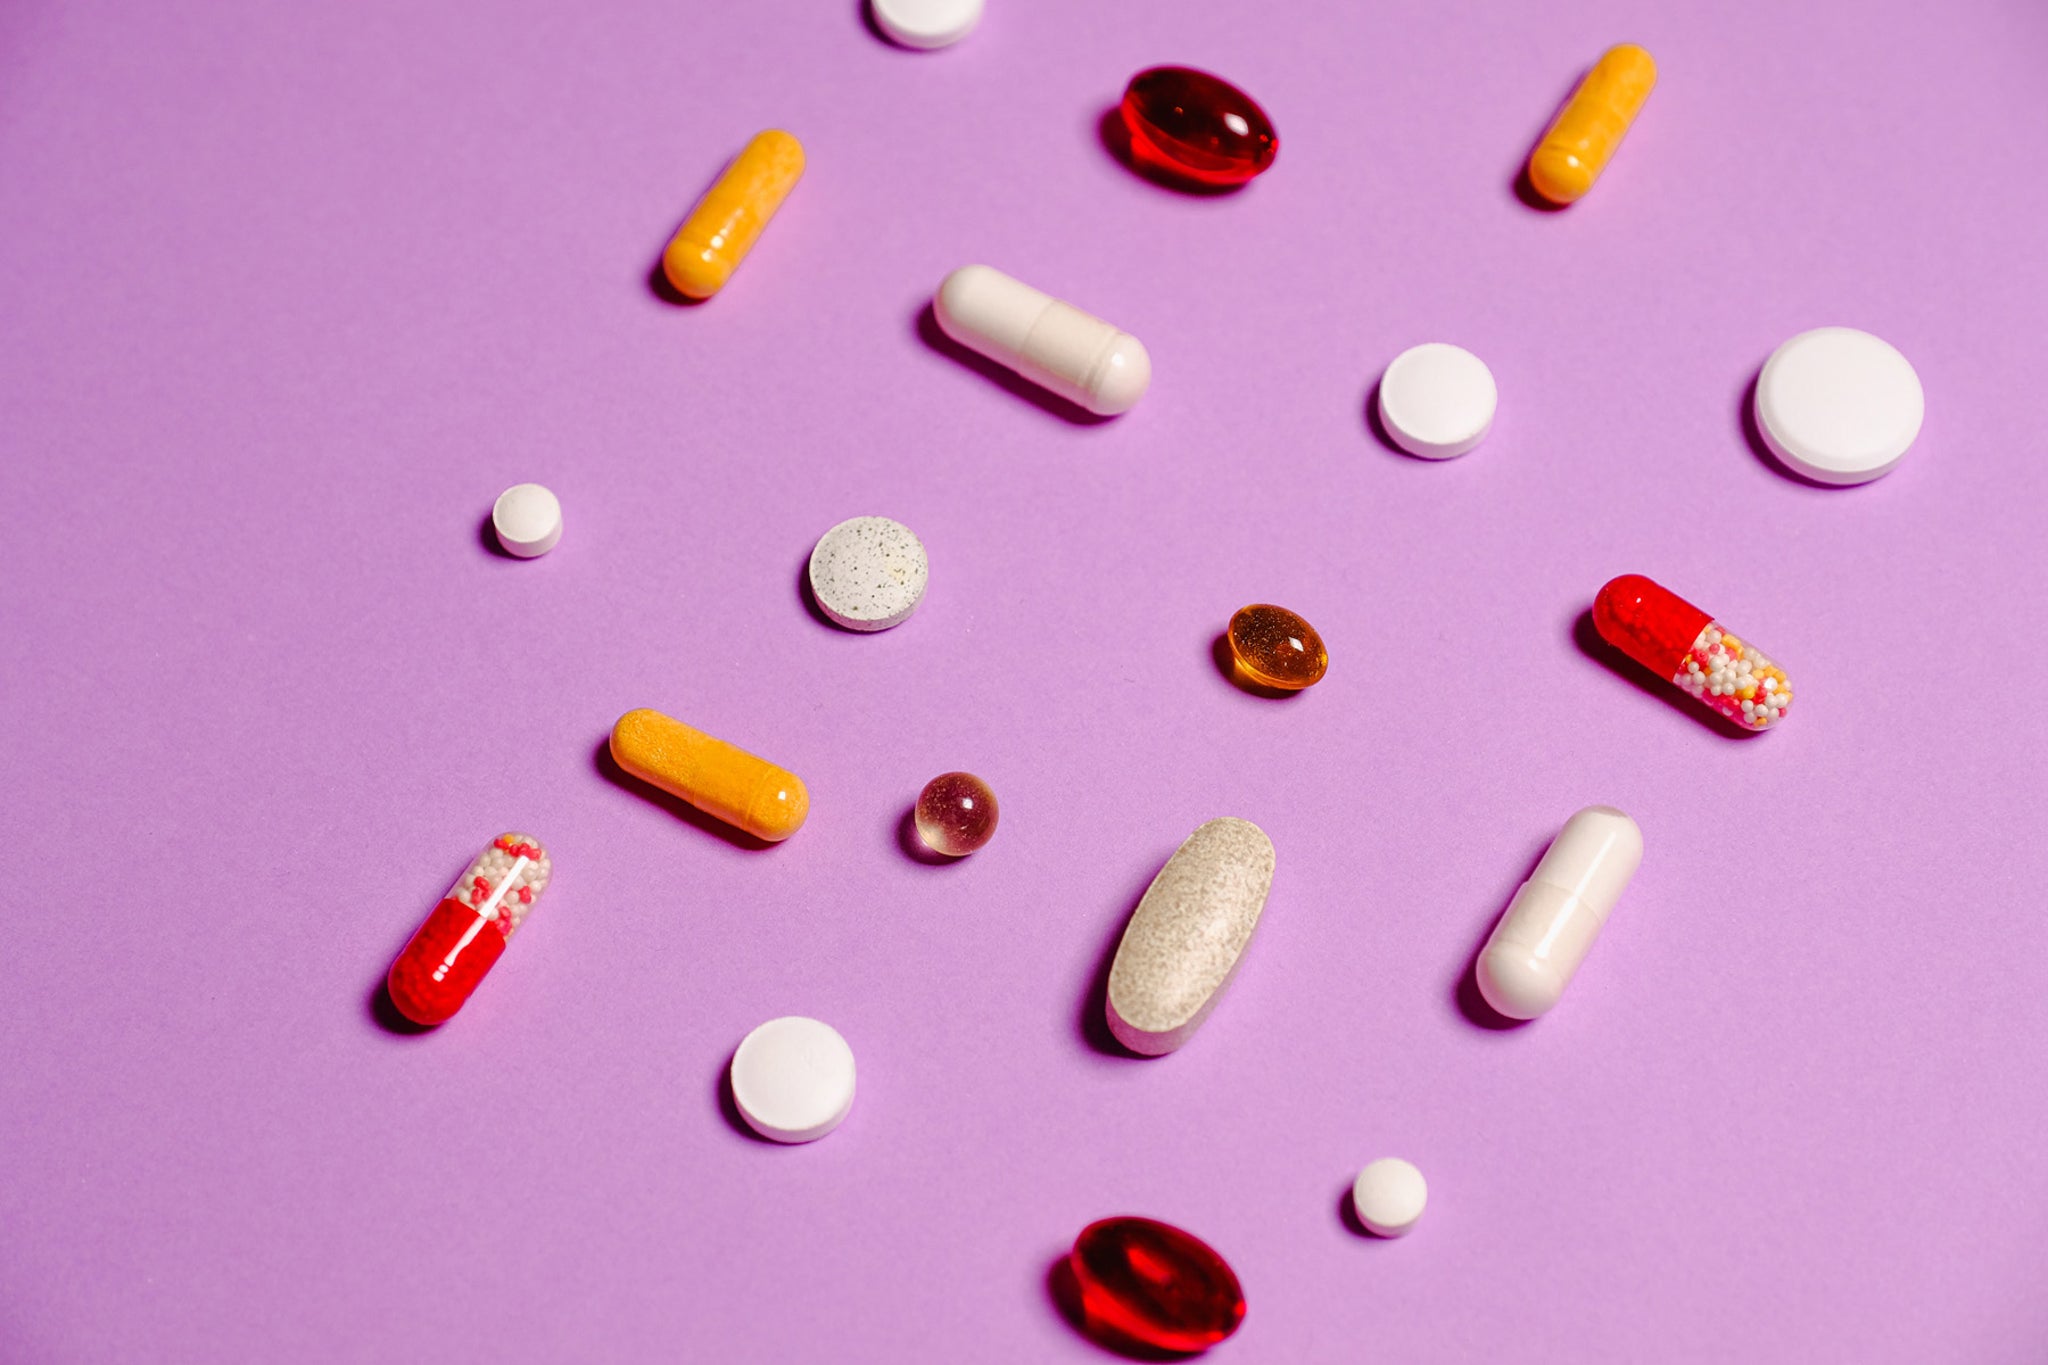 038_assorted_pills_and_capsules_on_a_pink_background.jpg